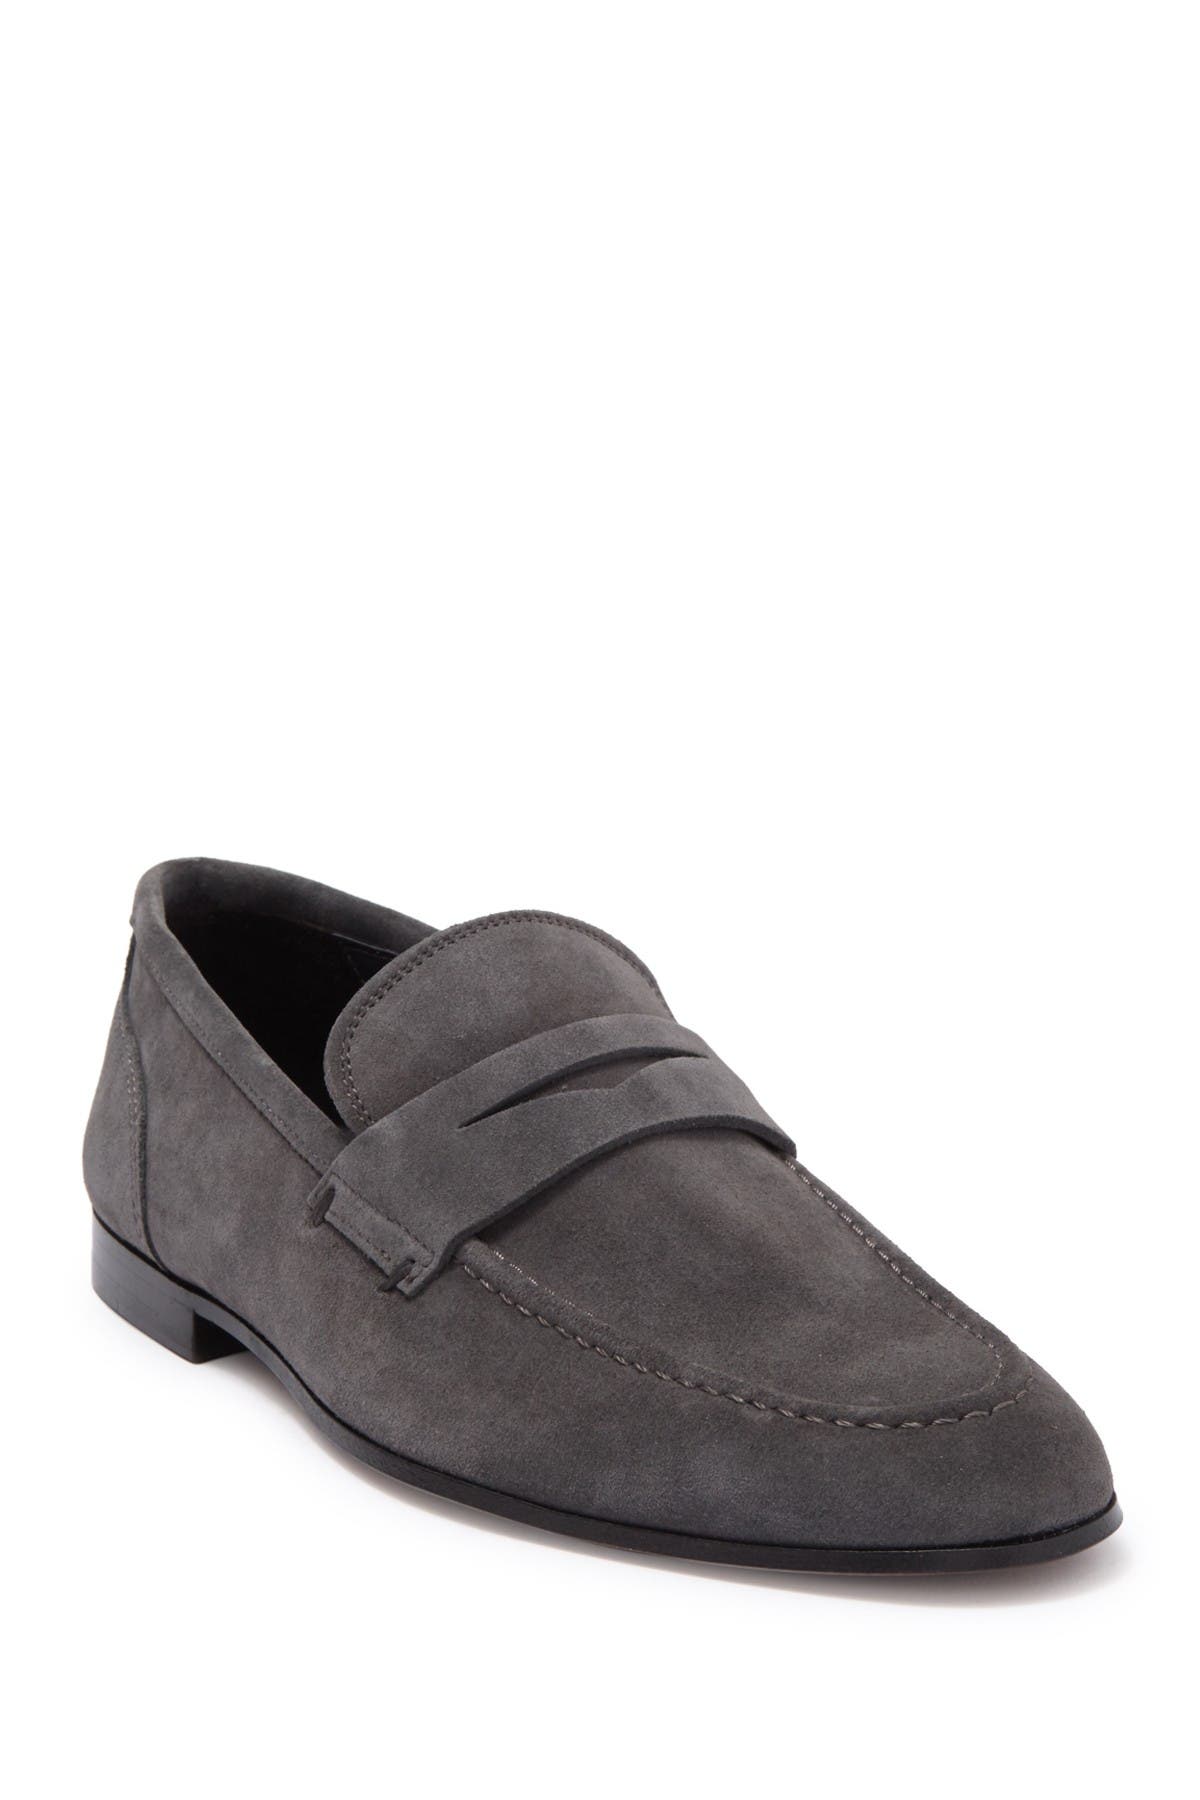 To Boot New York Deville Leather Penny Loafer In Fumo | ModeSens